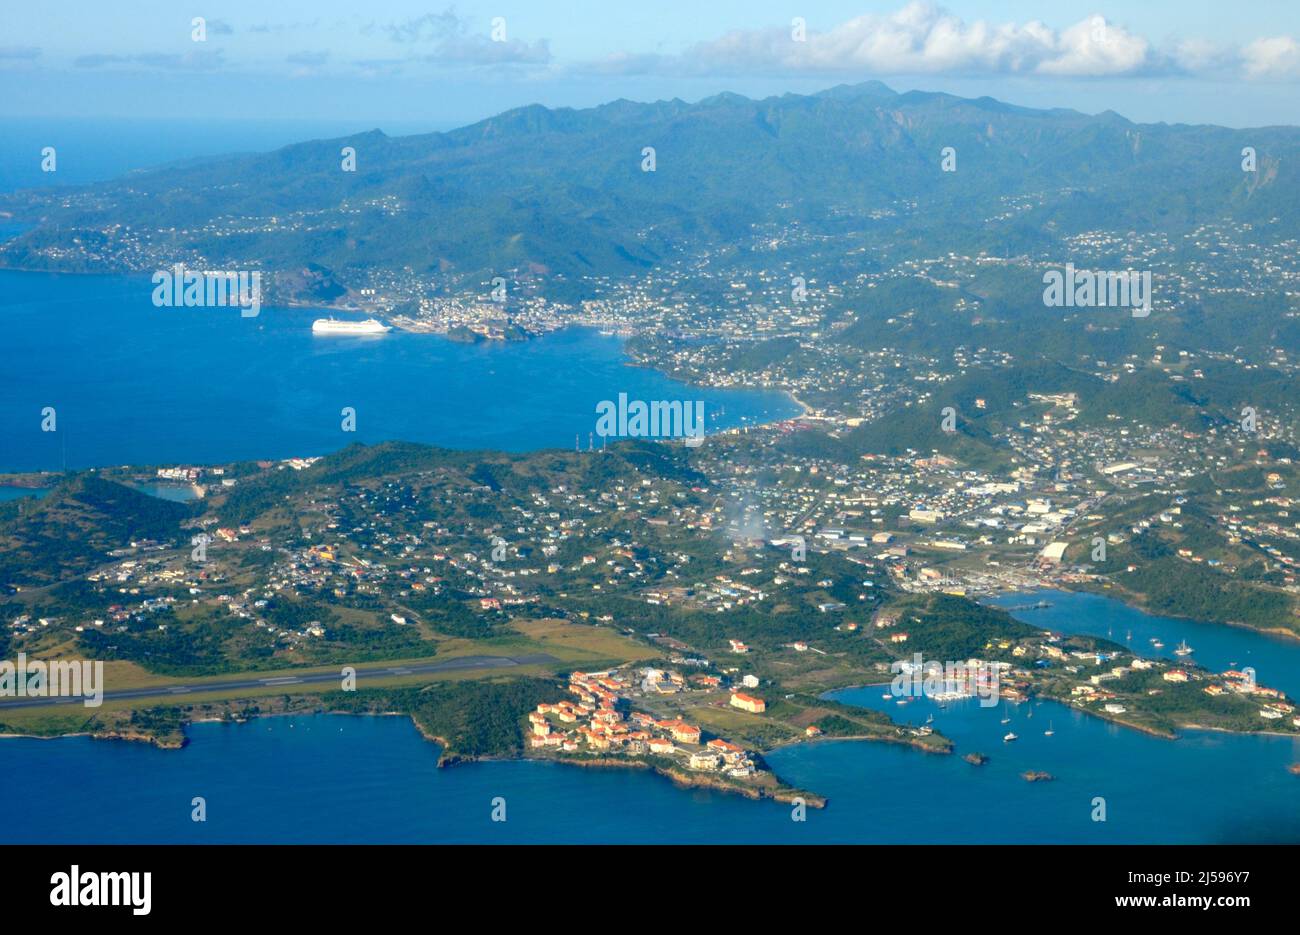 Aerial view of Caribbean Island of Grenada with capital St Georges, sea, and mountainous interior Stock Photo